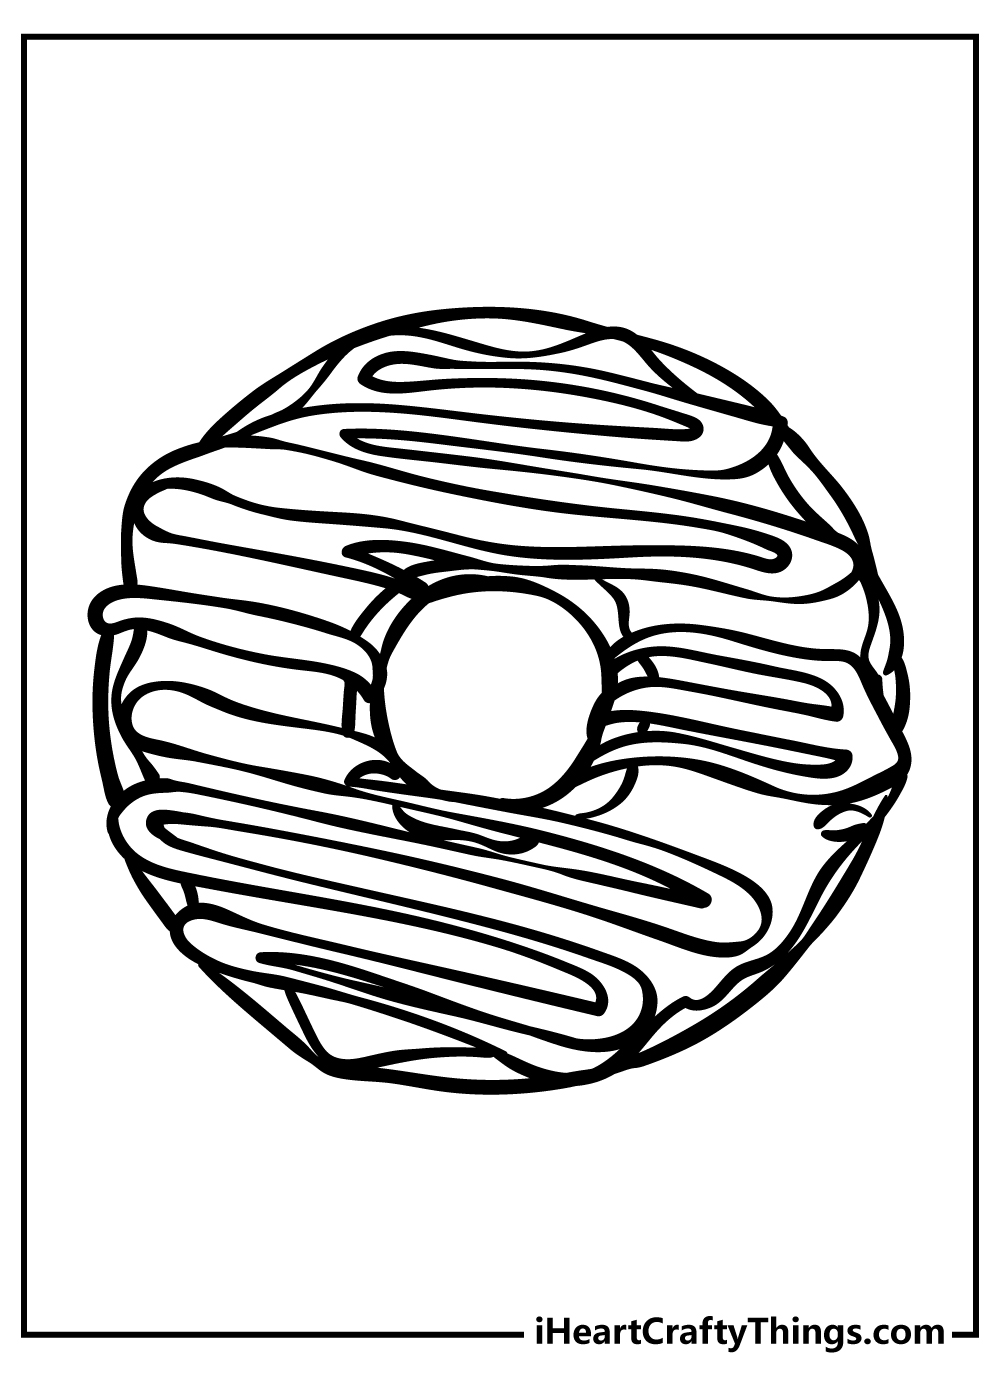 Donut Coloring Pages for kids free download